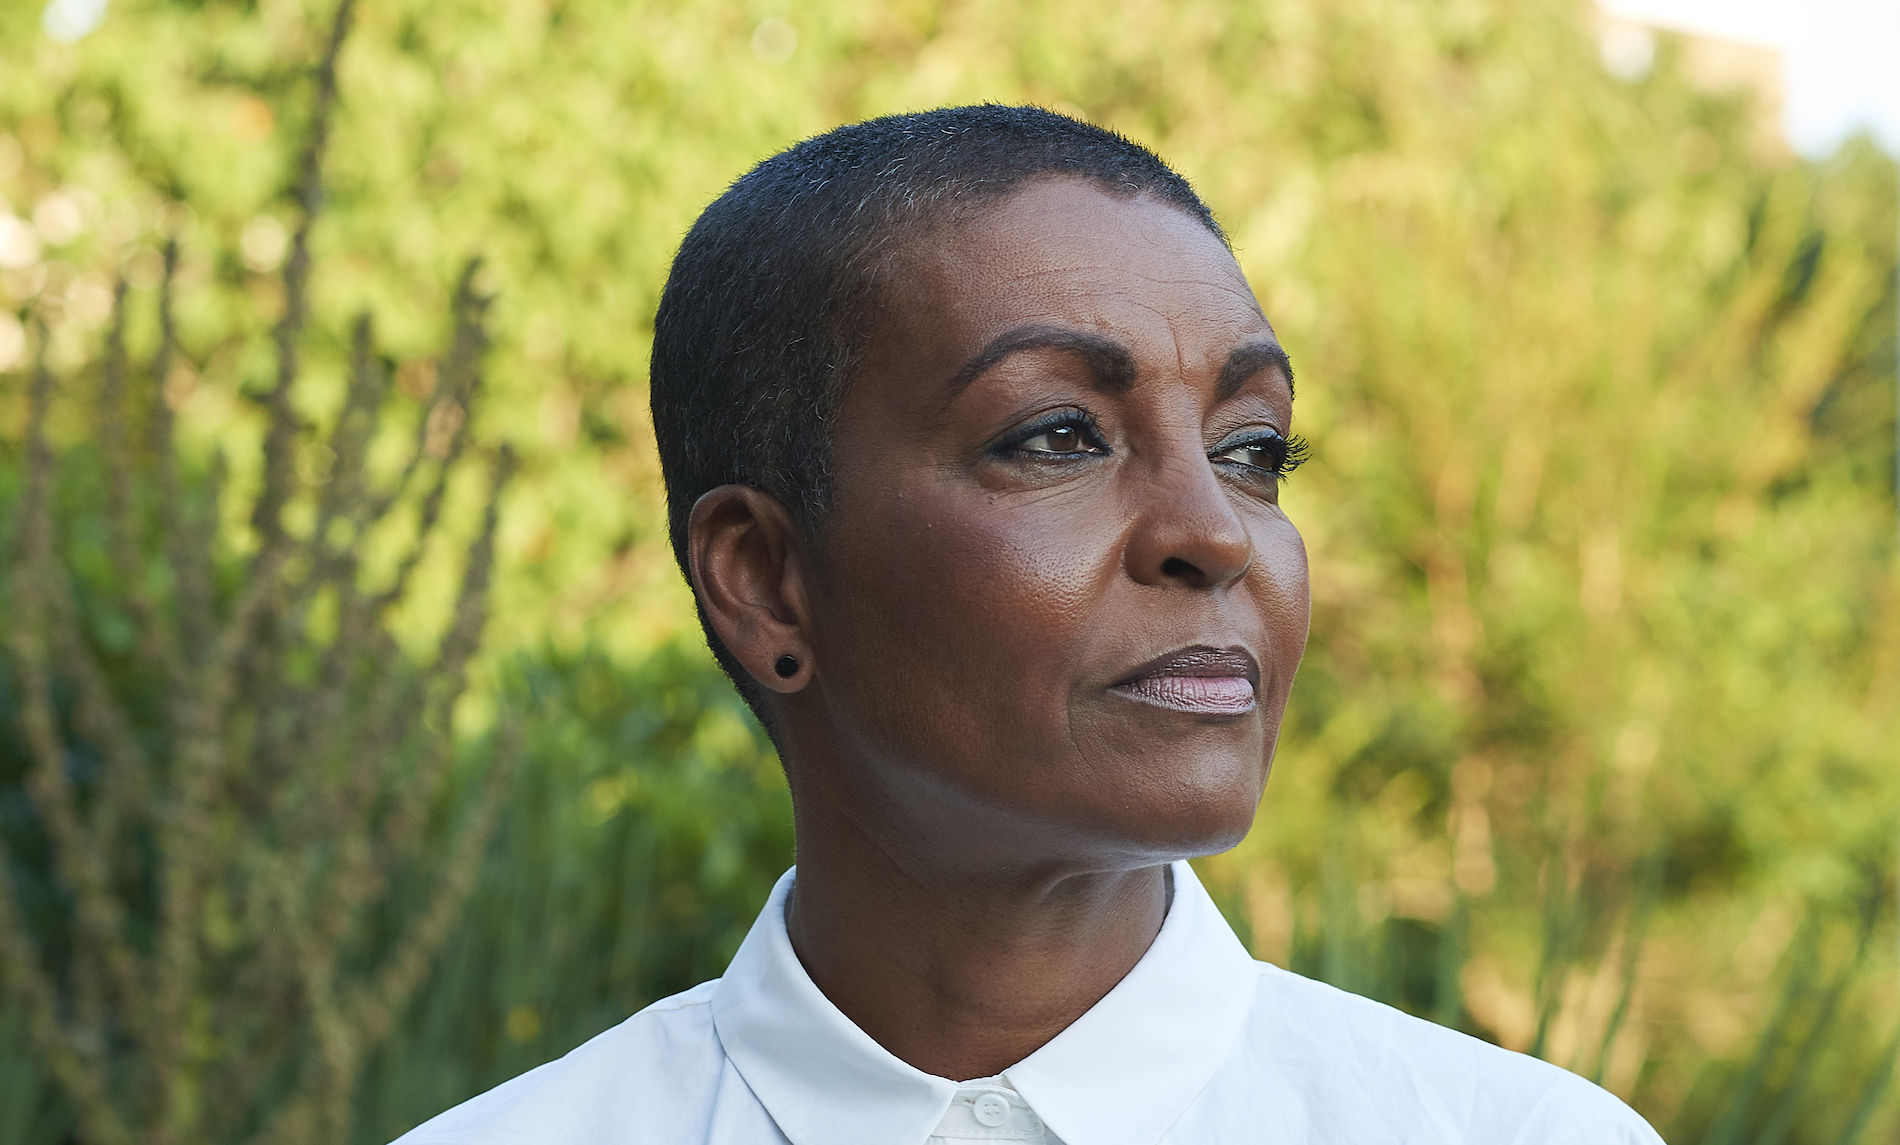 Adjoa Andoh will play the role of Lady Danbury